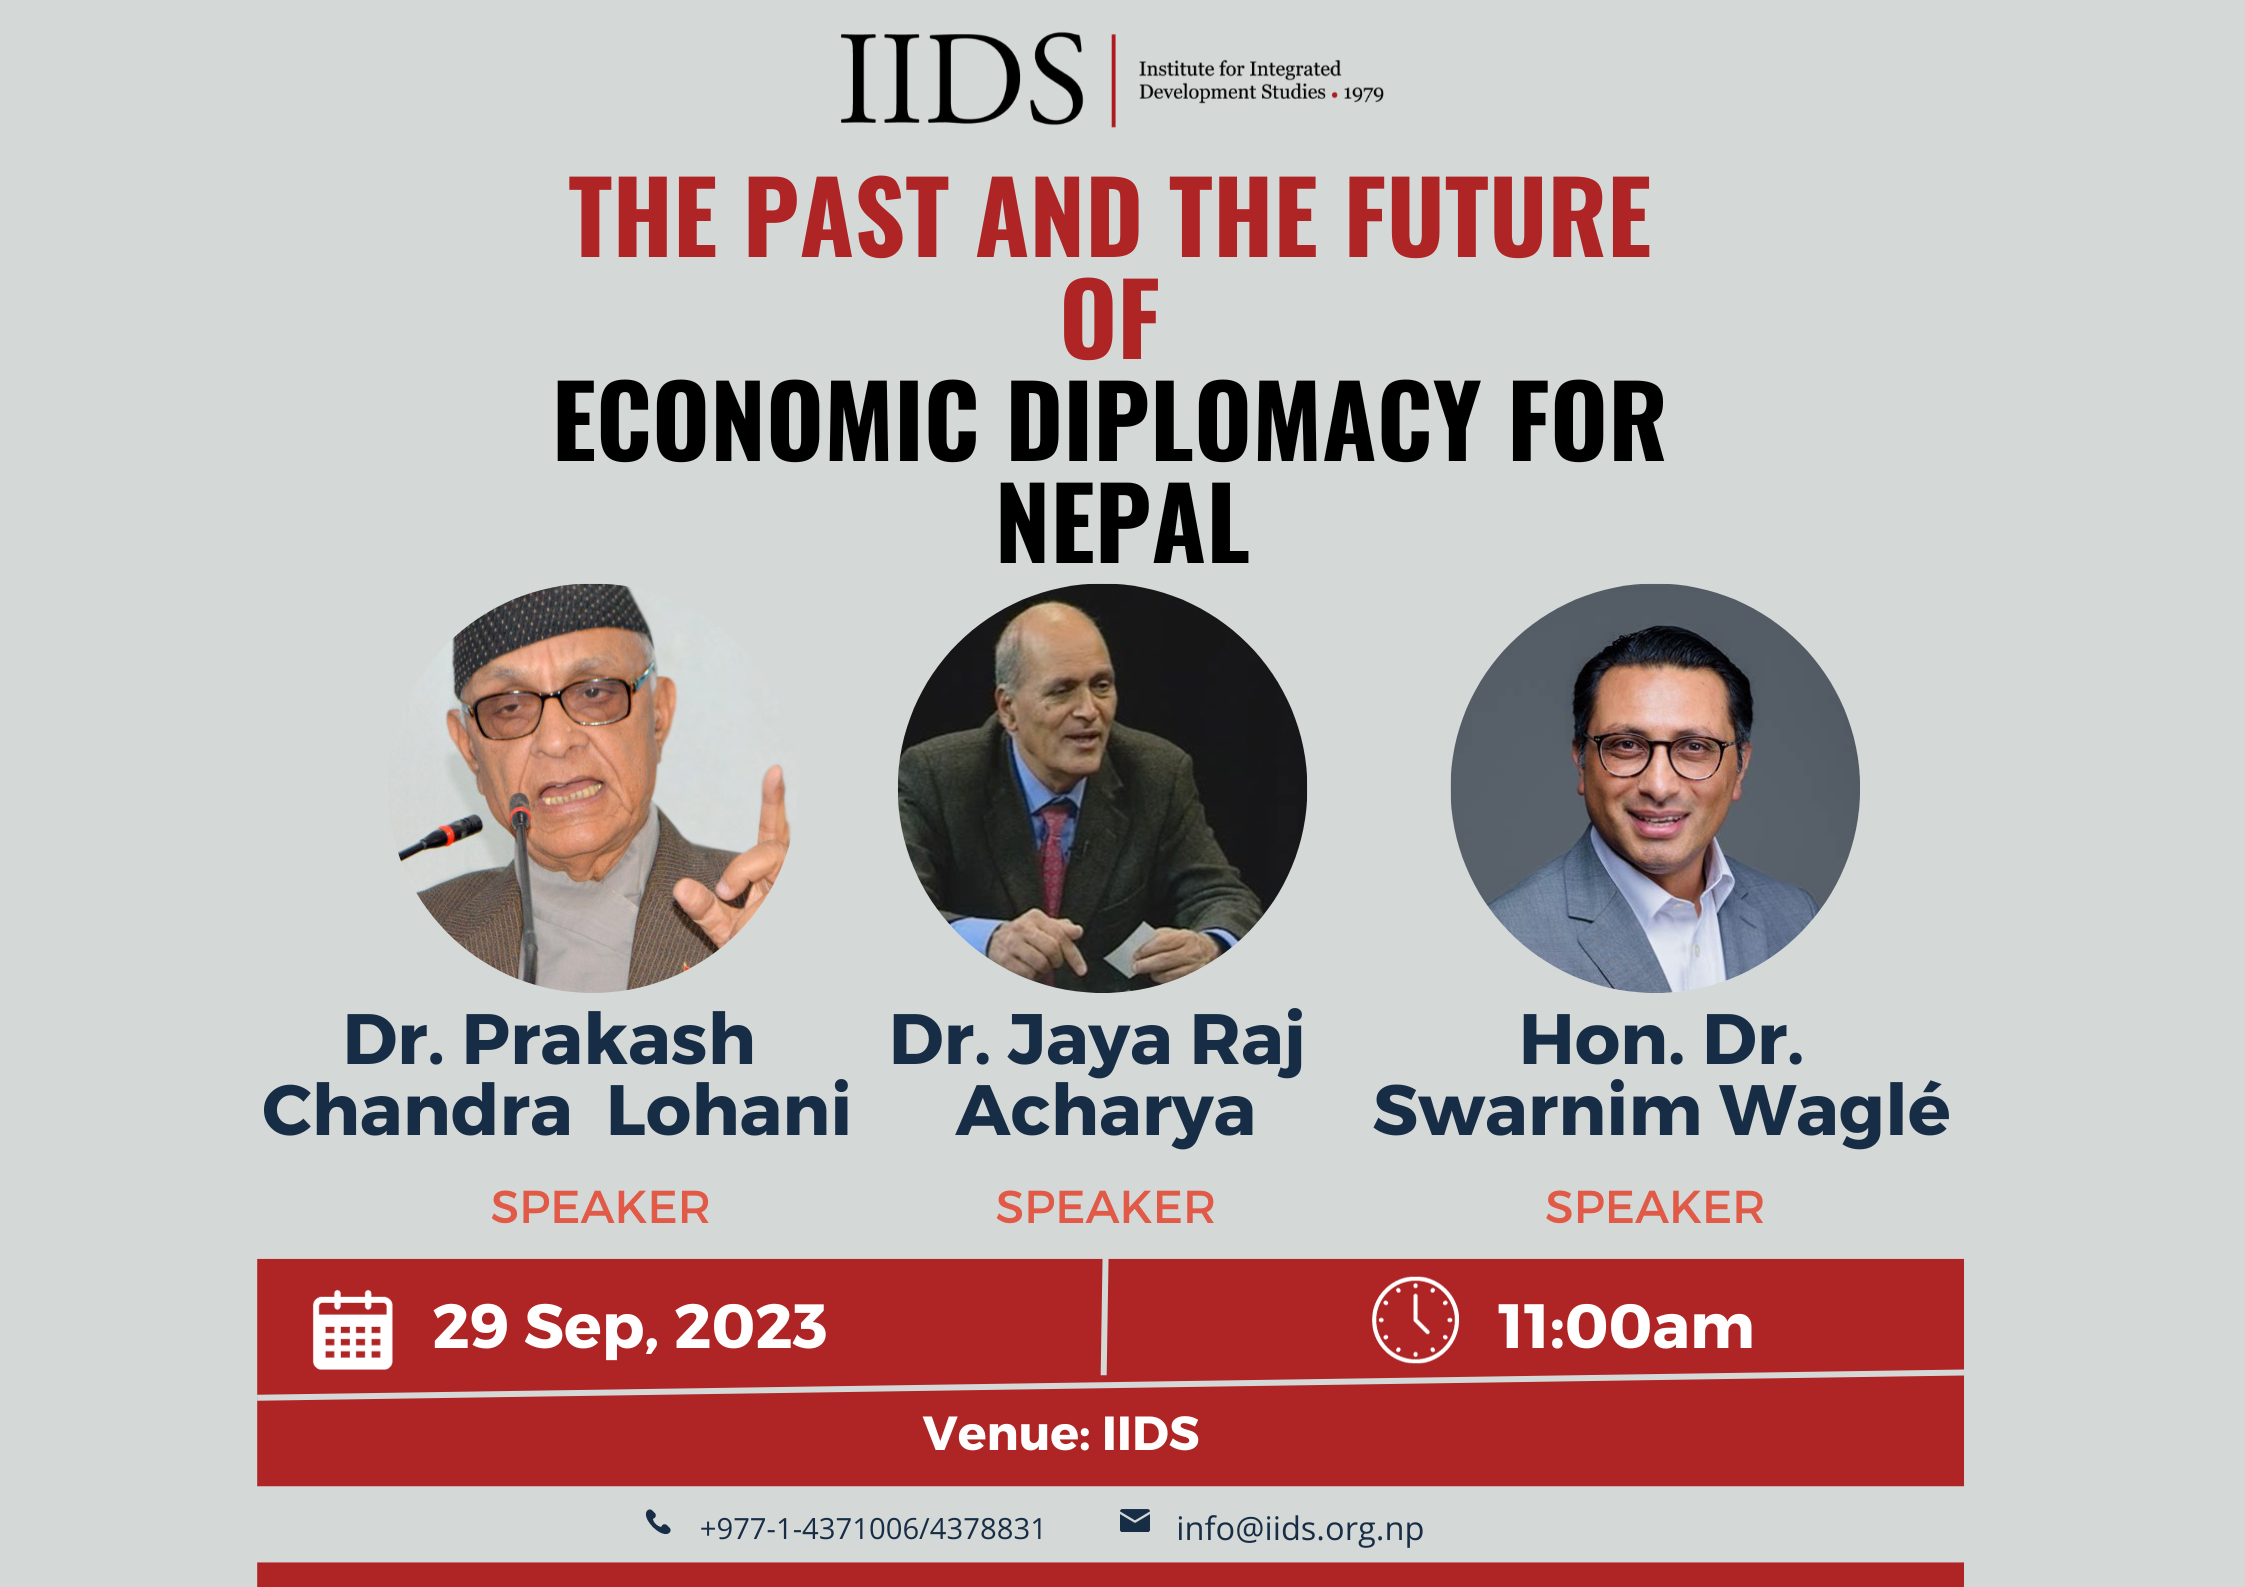 The Past and Future of Economic Diplomacy for Nepal